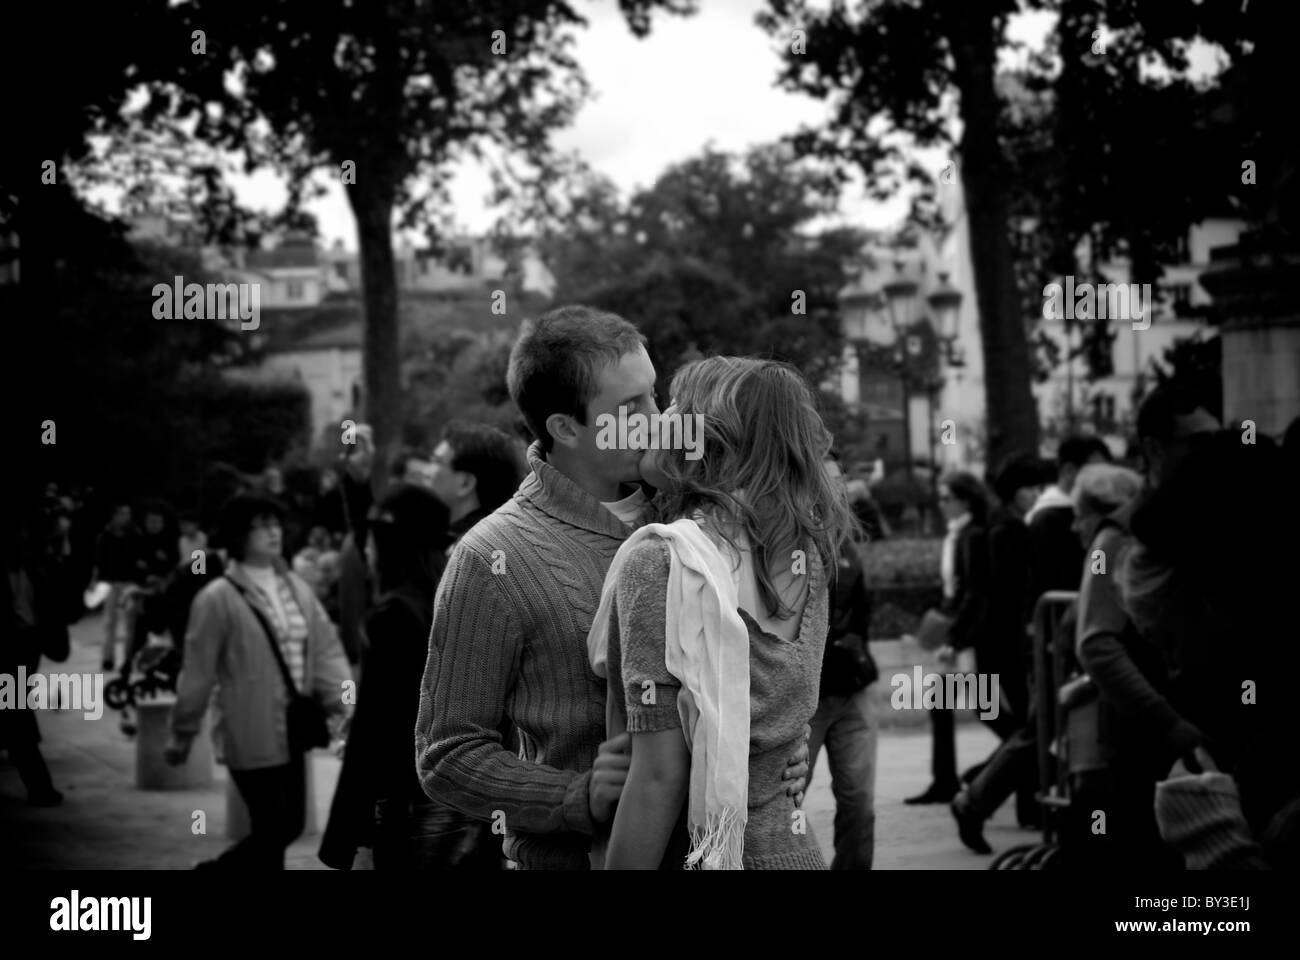 A romantic Kiss in Black and White. Stock Photo